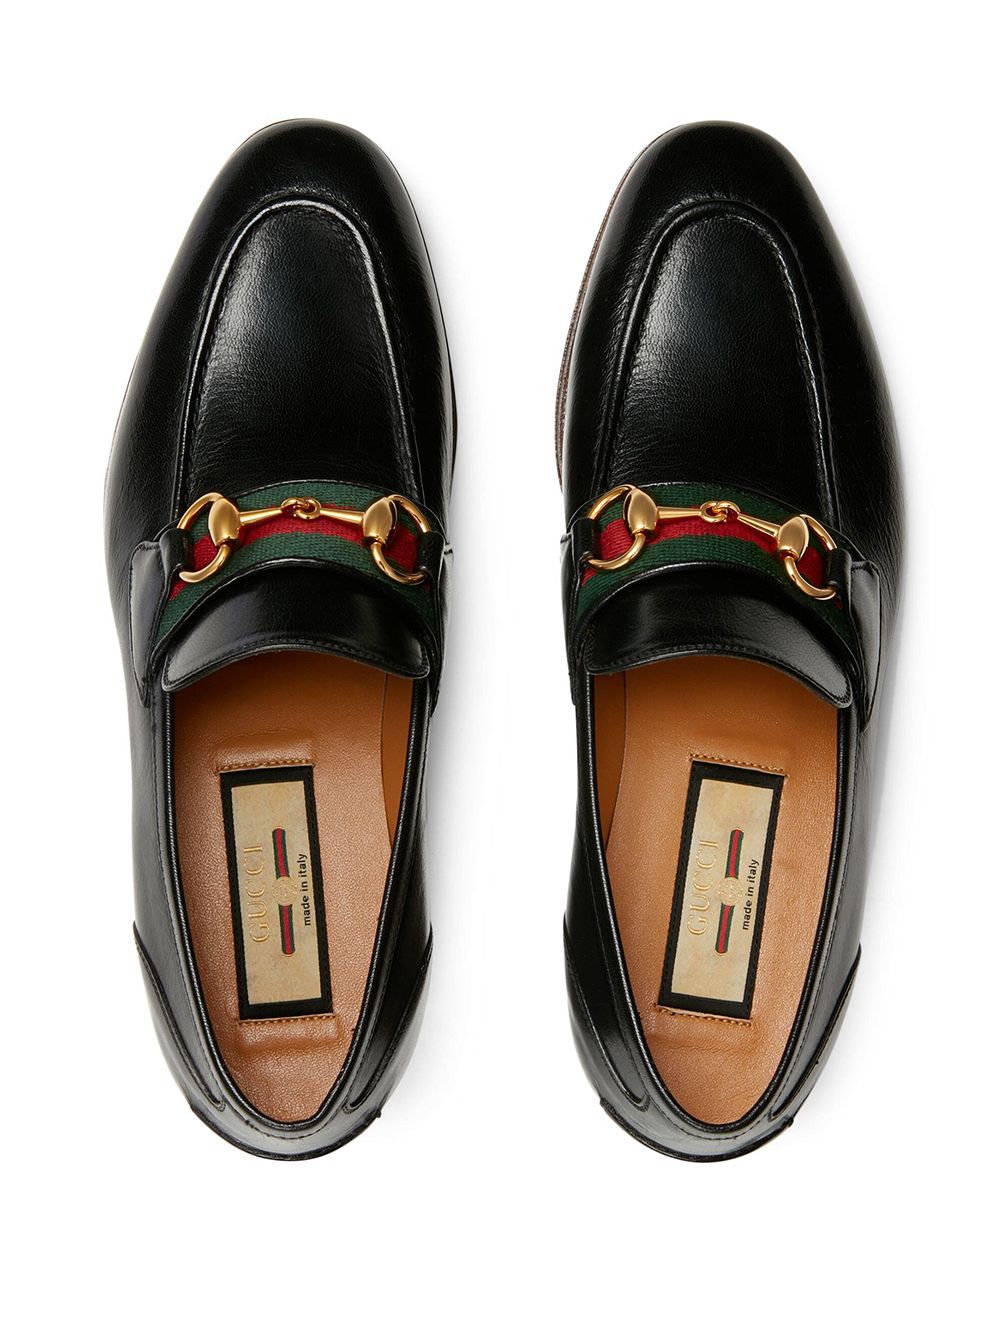 Gucci Horsebit And Web Leather Loafers - Farfetch